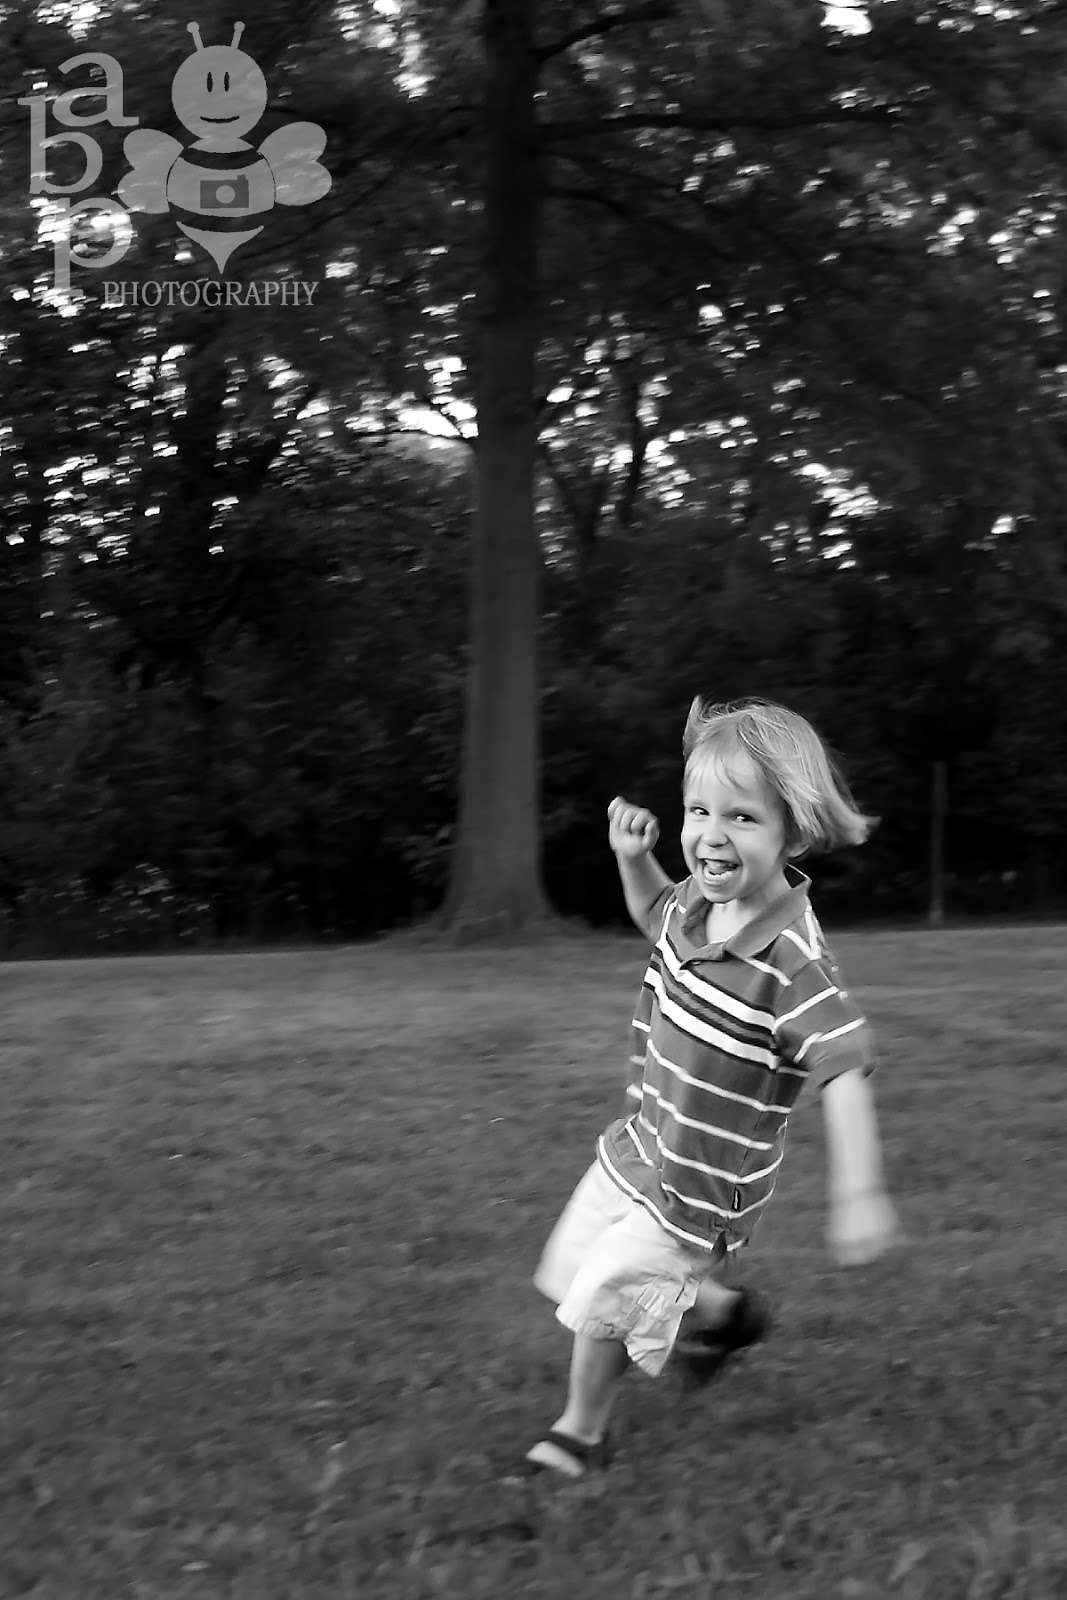 A Boy In Motion | ABP Photography